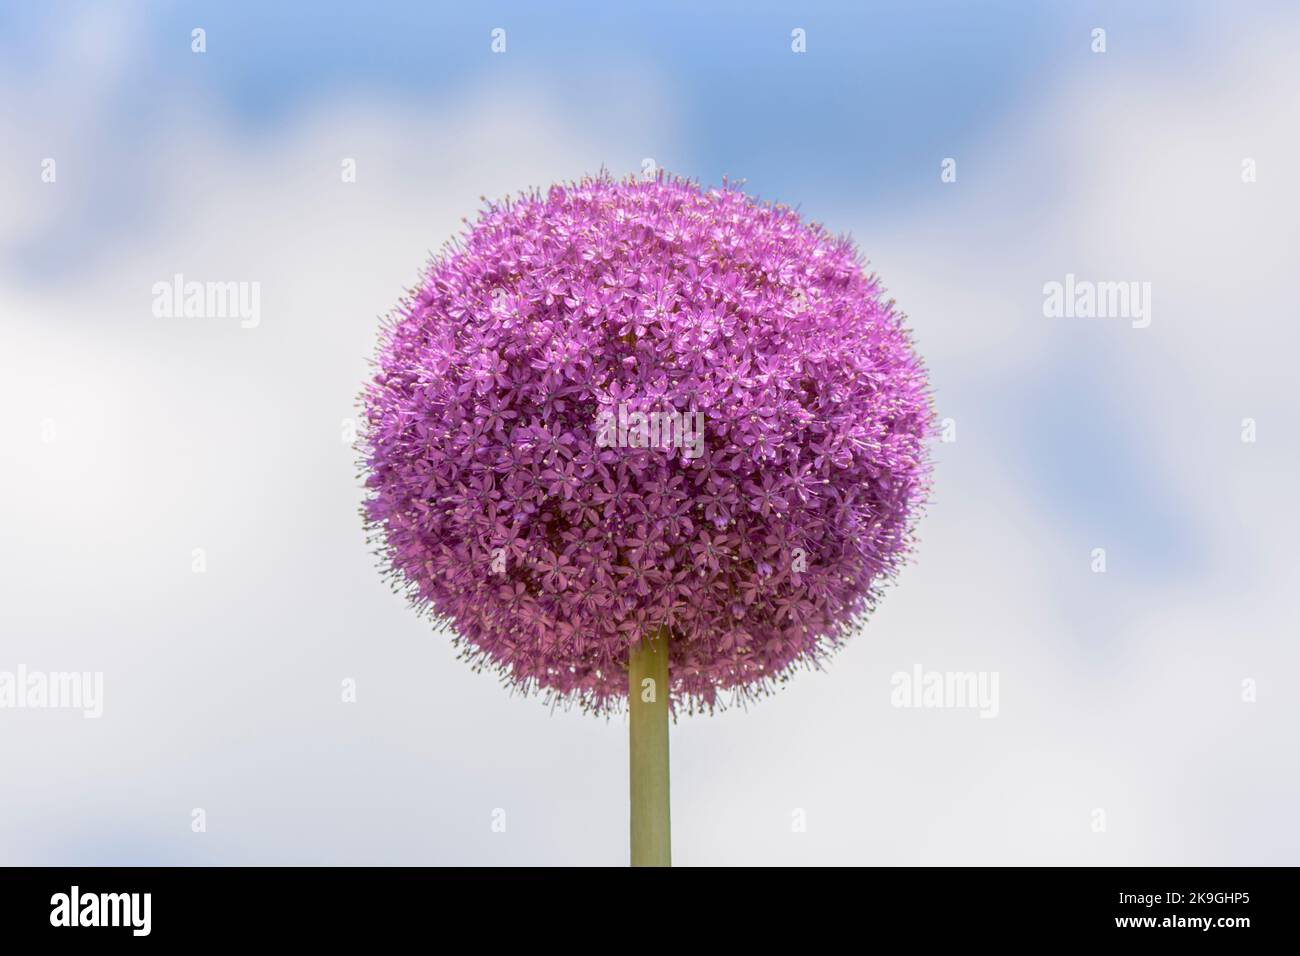 Purple Allium giganteum or giant onion isolated against a diffuse cloudy sky Stock Photo